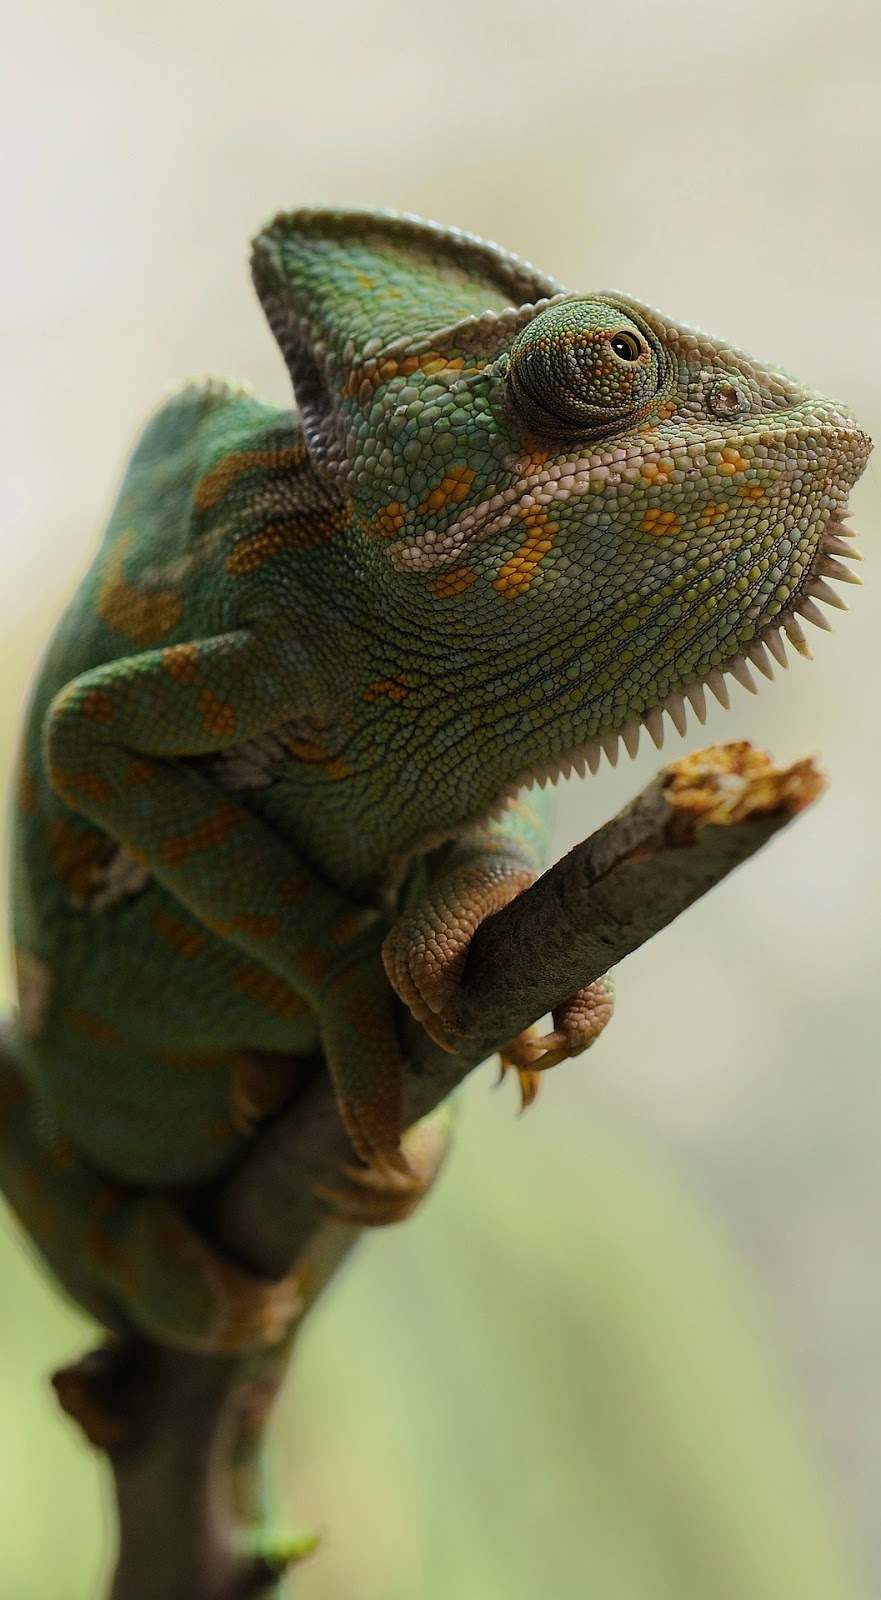 Picture of a veiled chameleon.